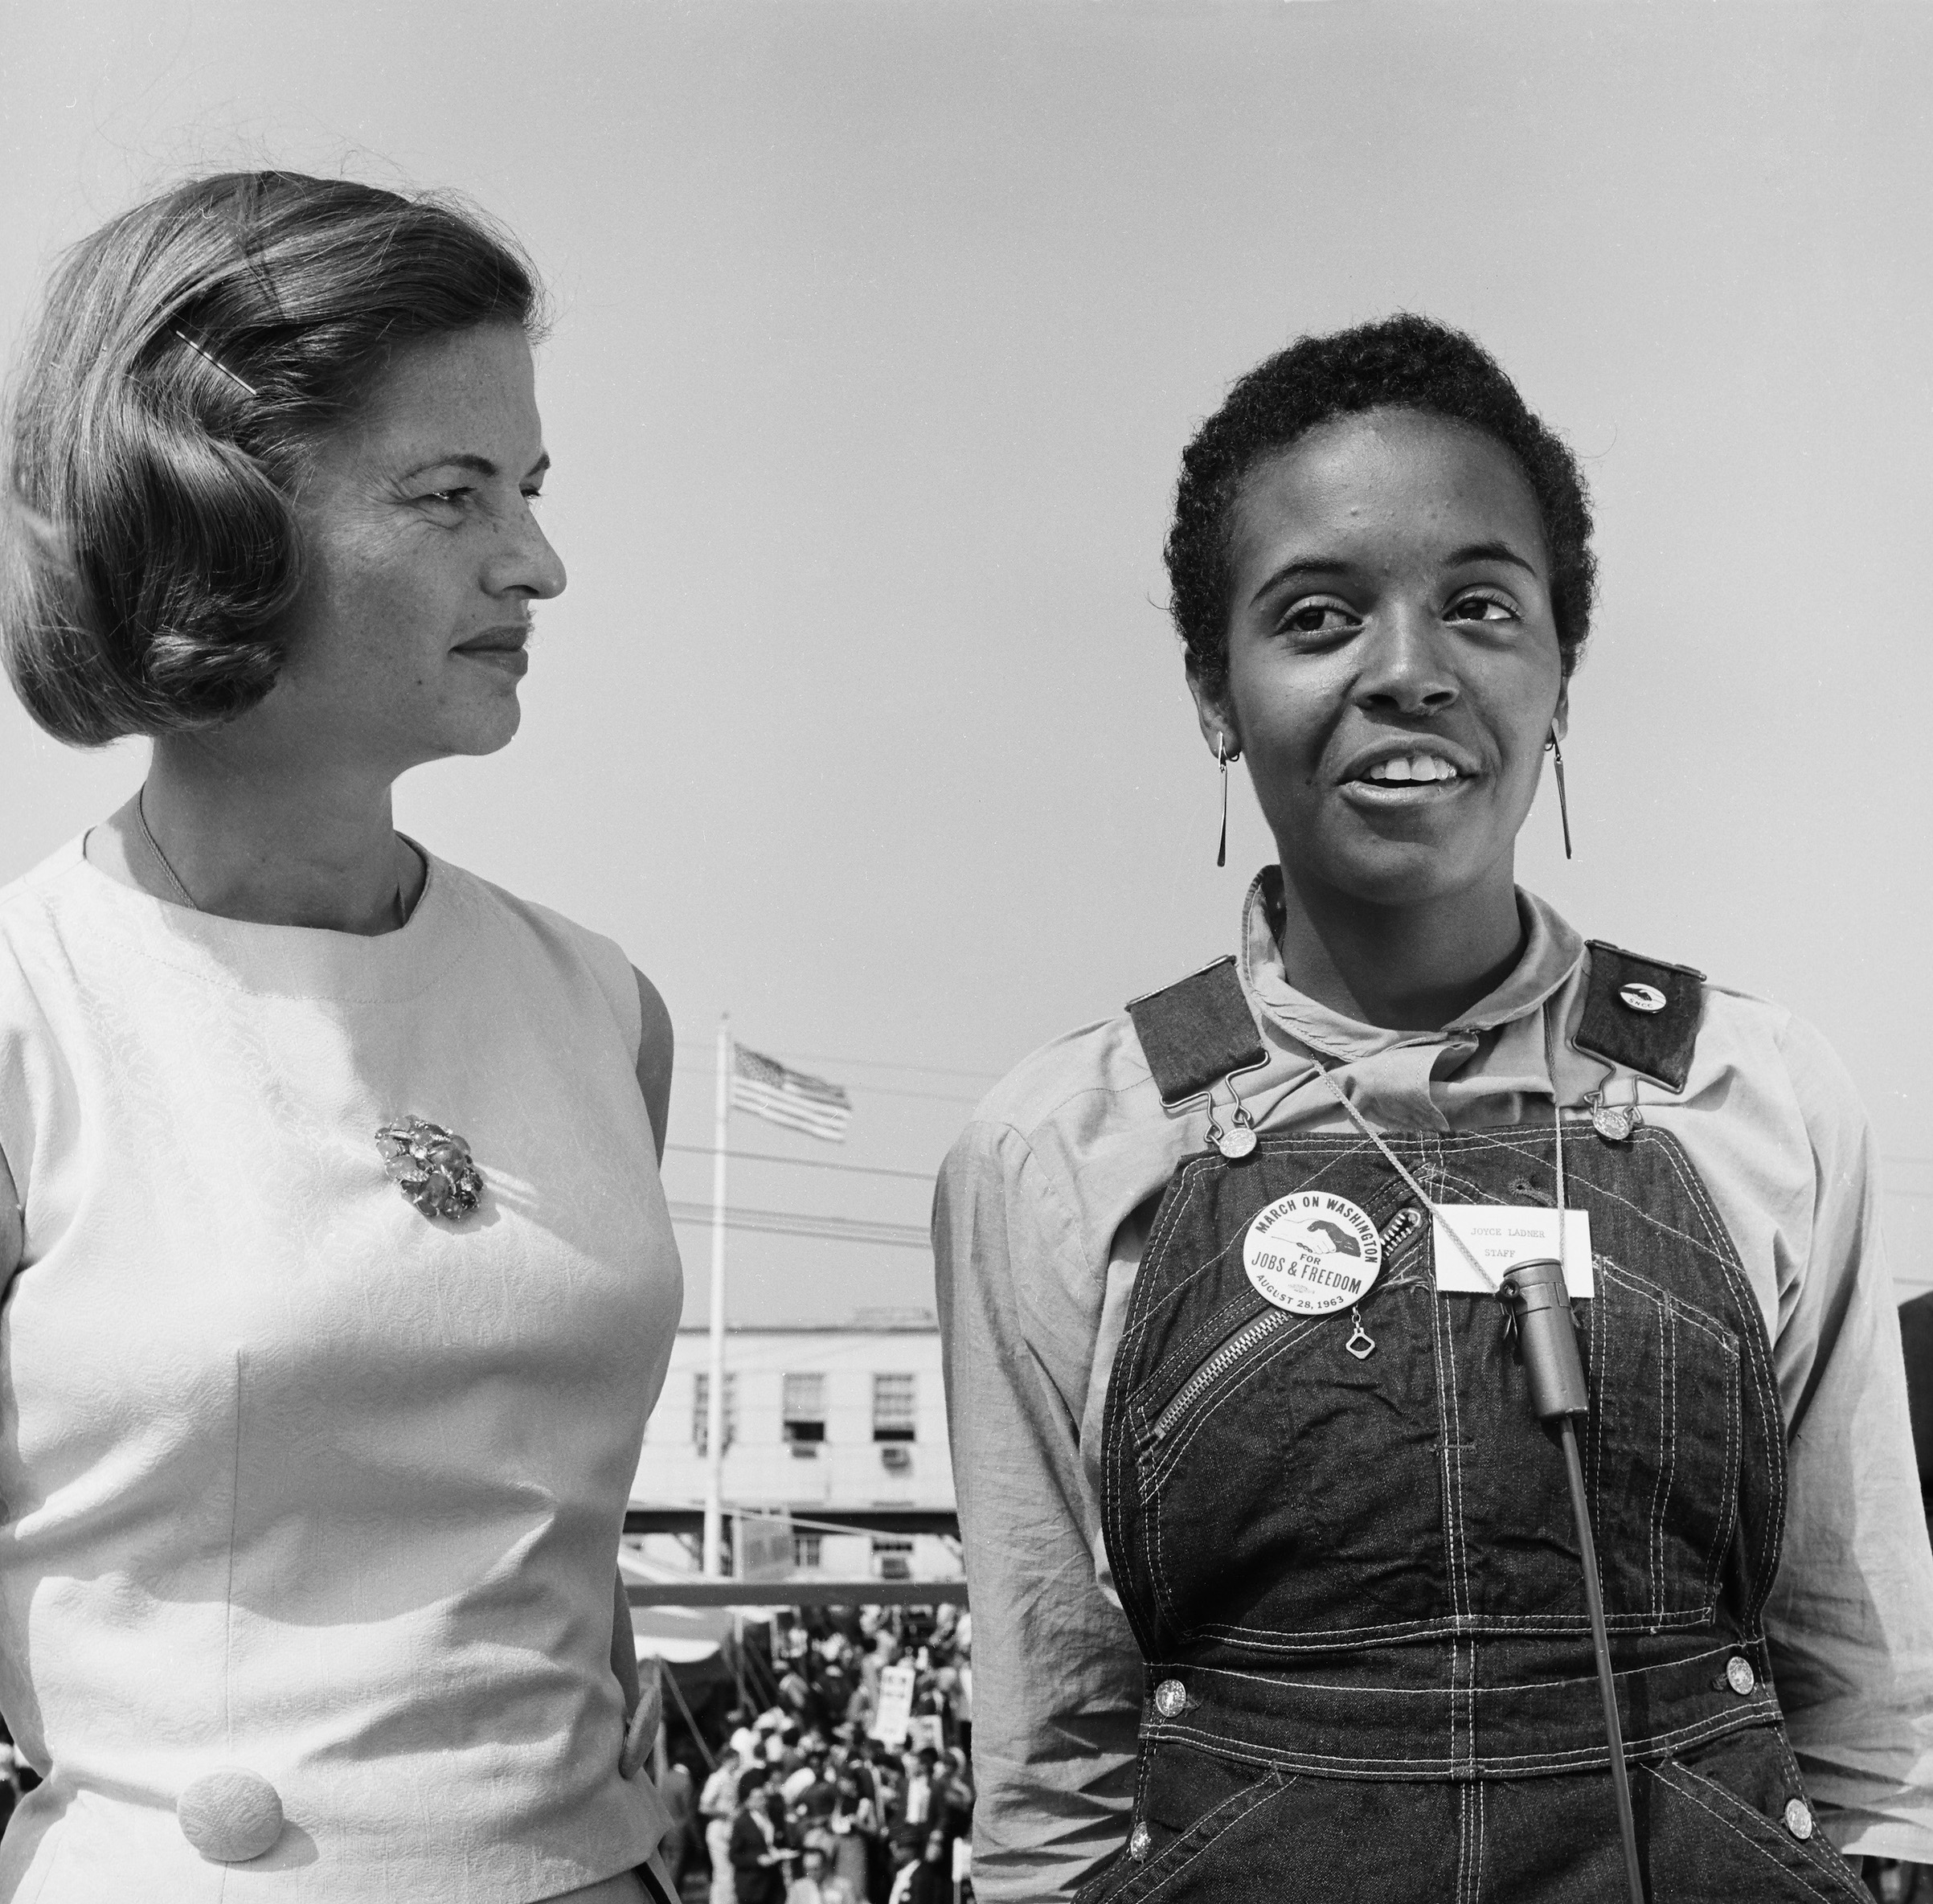 NBC News -- MARCH ON WASHINGTON FOR JOBS AND FREEDOM 1968 -- Pictured: (l-r) NBC News' Nancy Dickerson and Mississippi SNCC March Coordinator Joyce Ladner during the March on Washington for Jobs and Freedom in Washington, D.C., on Aug. 28, 1963. (NBCU Photo Bank/NBCUniversal via Getty Images)